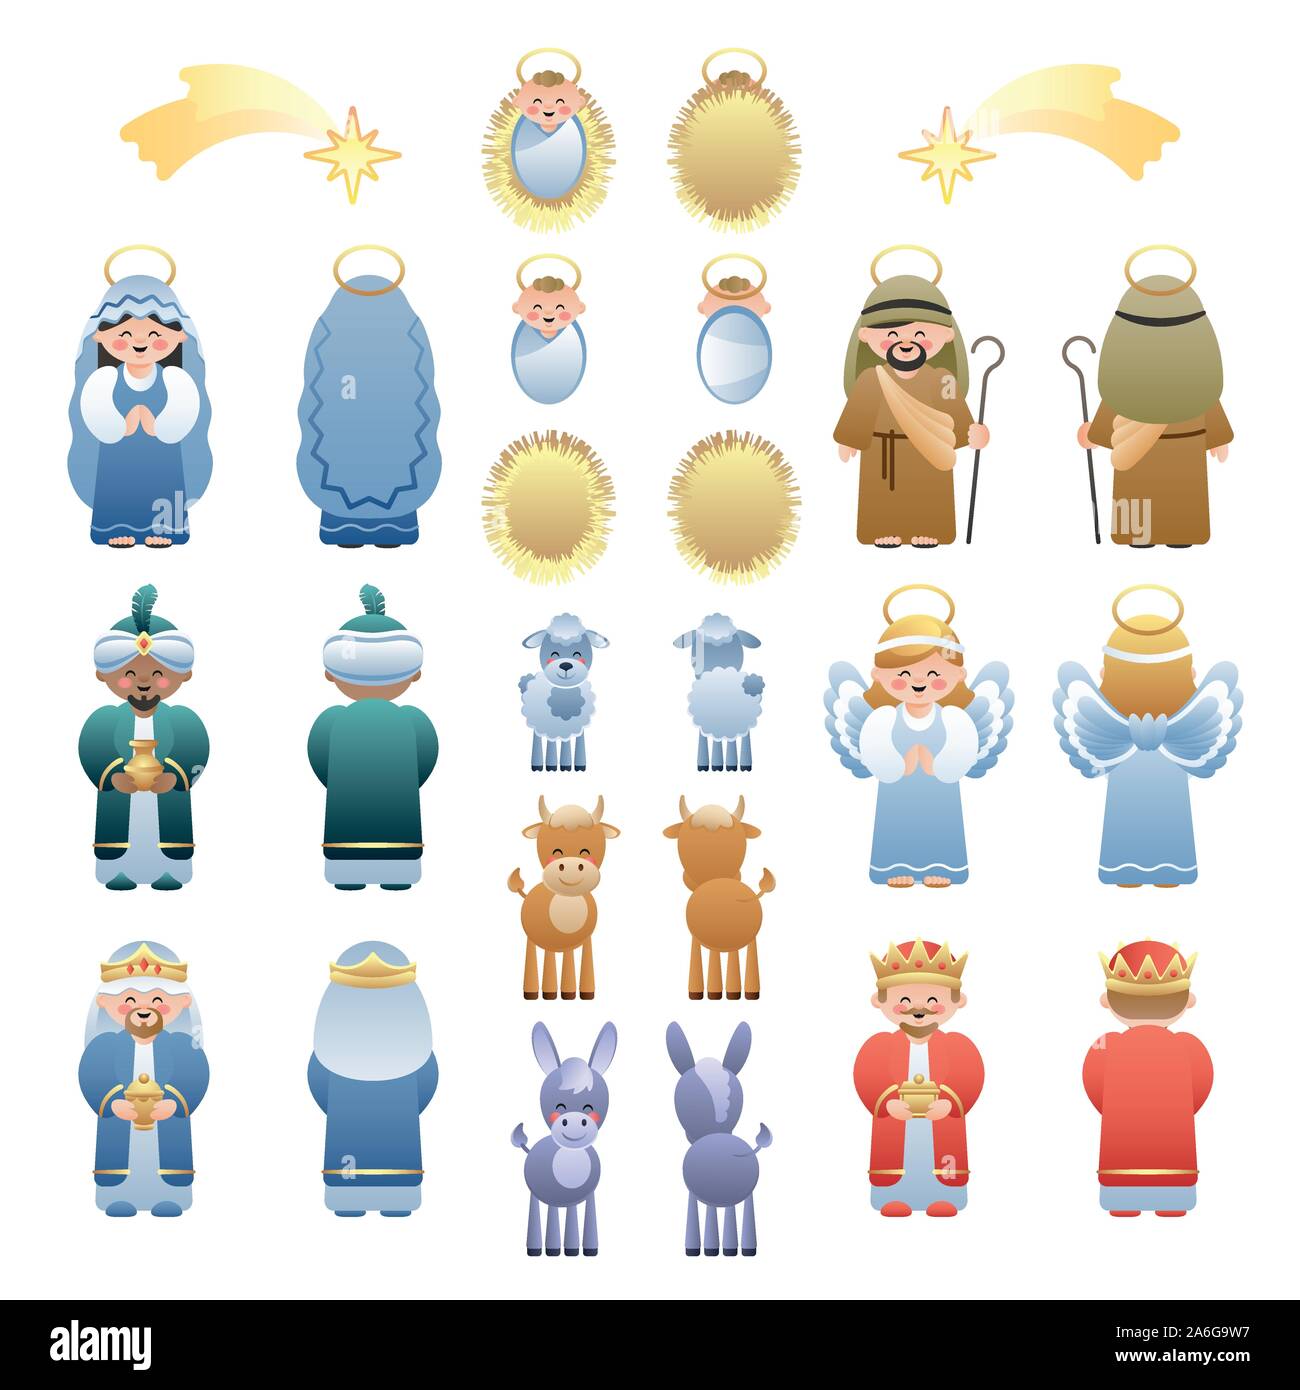 Big Two Sided Nativity Icons Collection. Cute cartoon characters. Vector illustration without transparency. Stock Vector